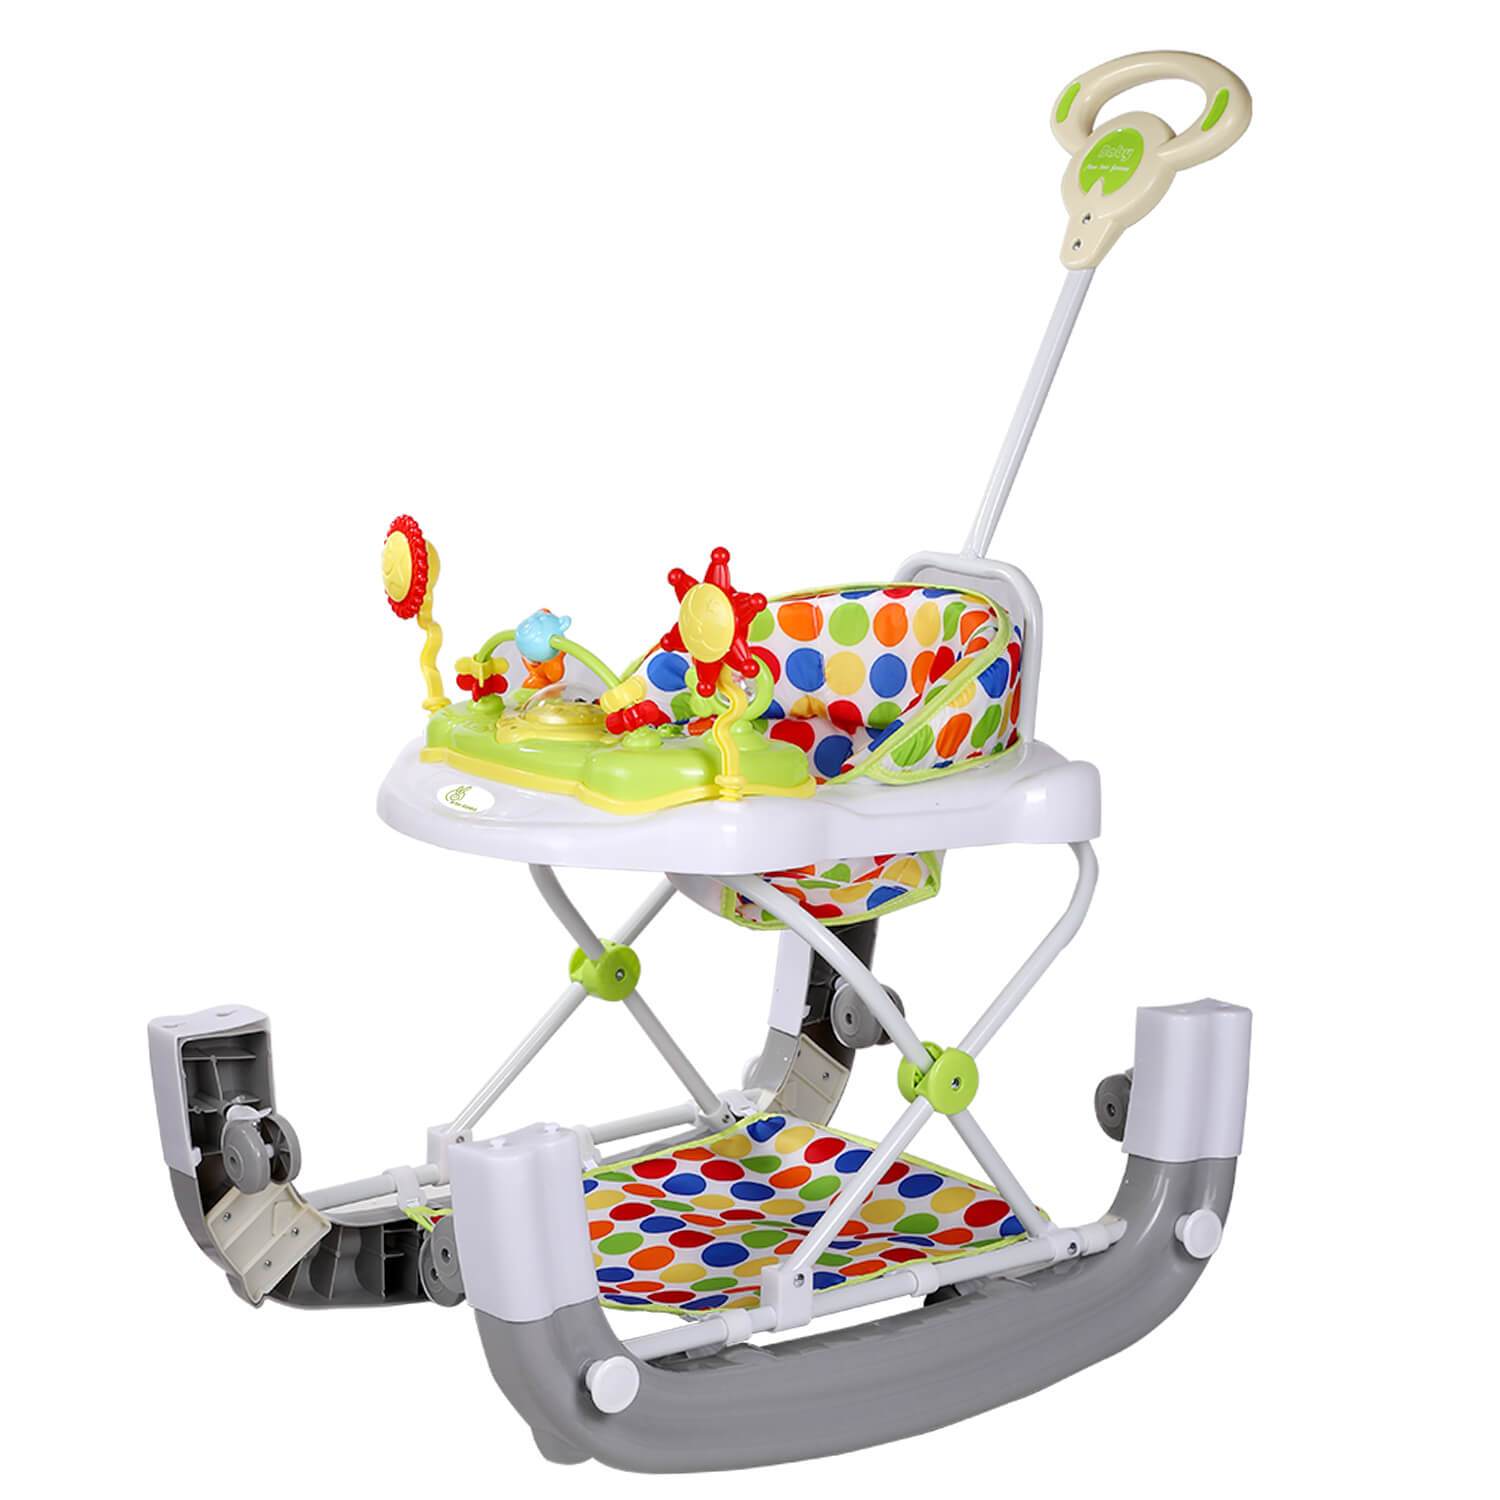 R for Rabbit Classic Rocking Baby Walker for Kids